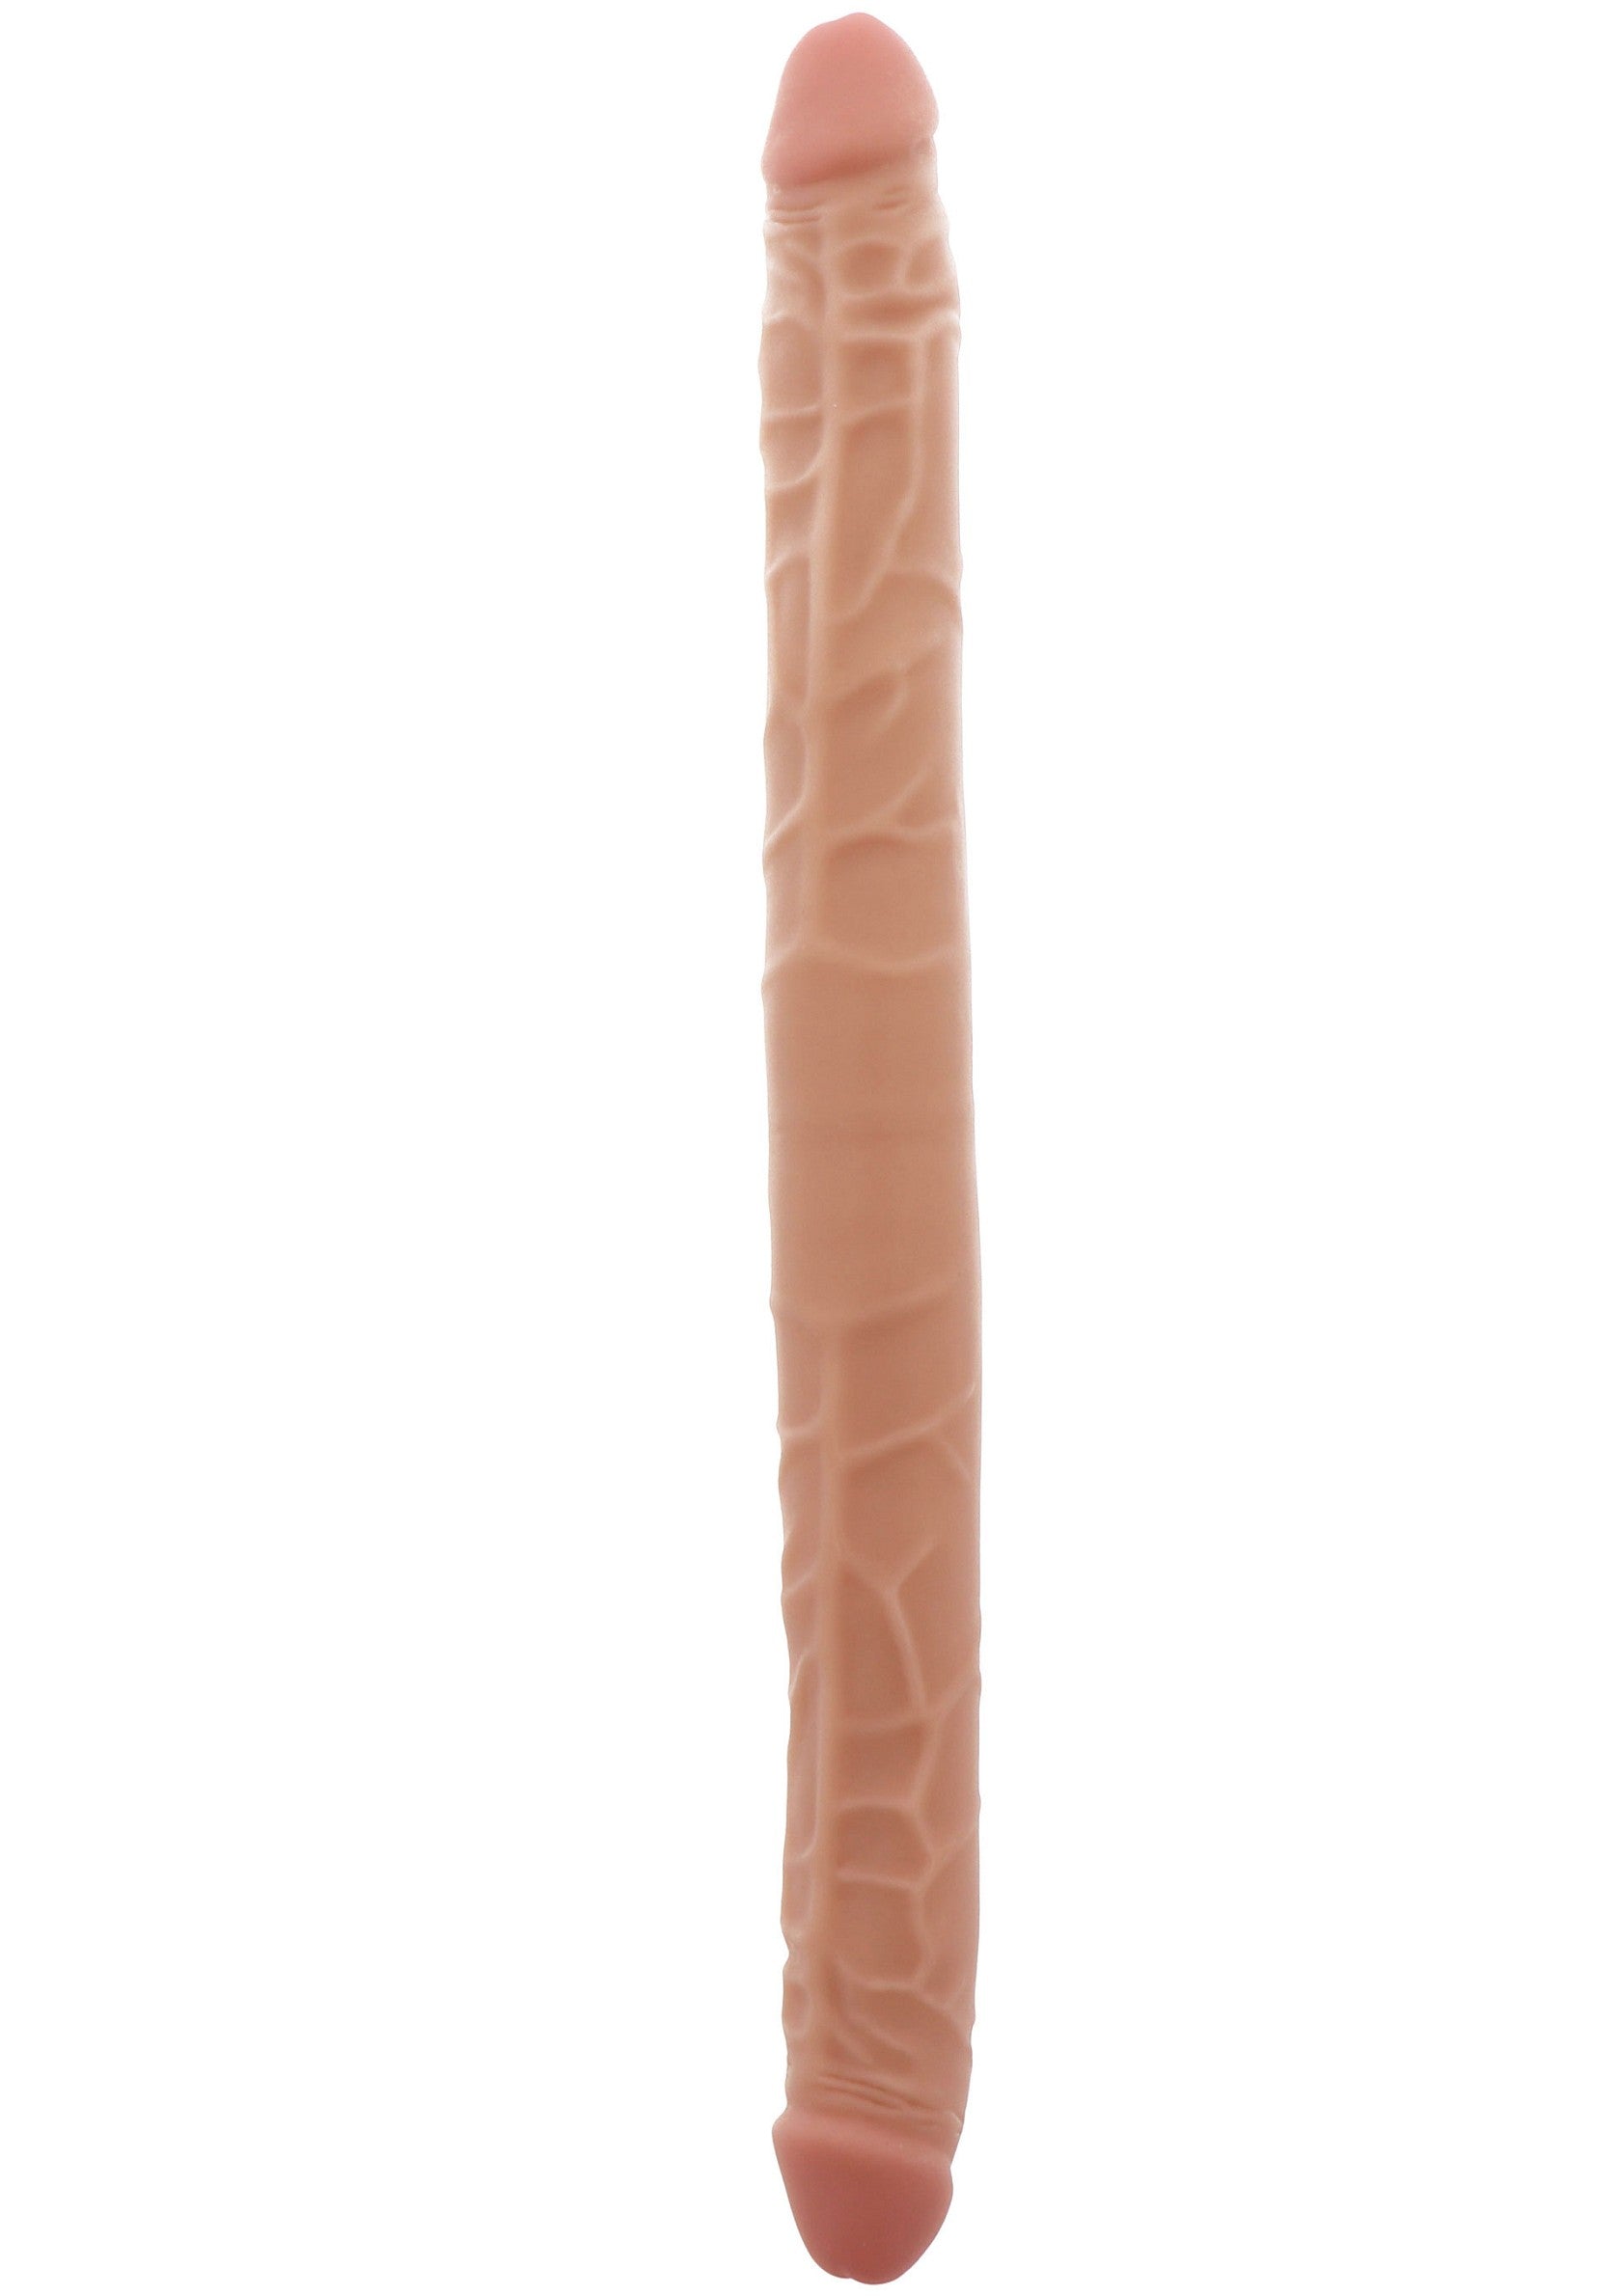 ToyJoy Get Real Double Dong 16' SKIN - 4